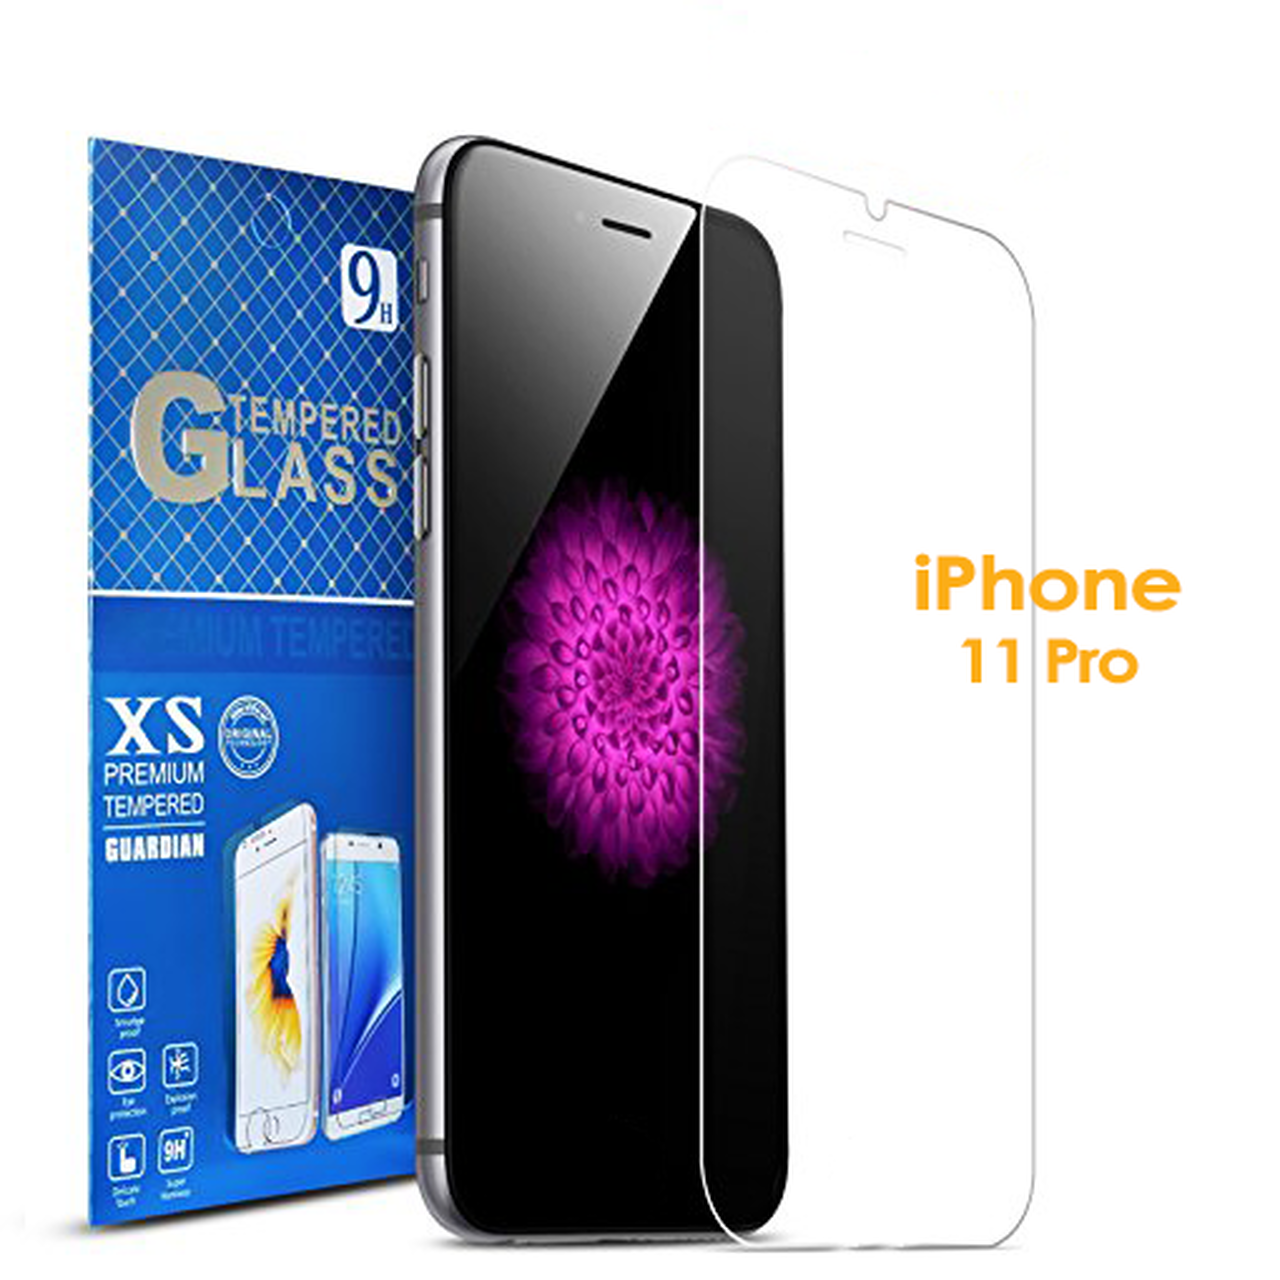 Tempered Glass - 20% OFF ( $7.99 )